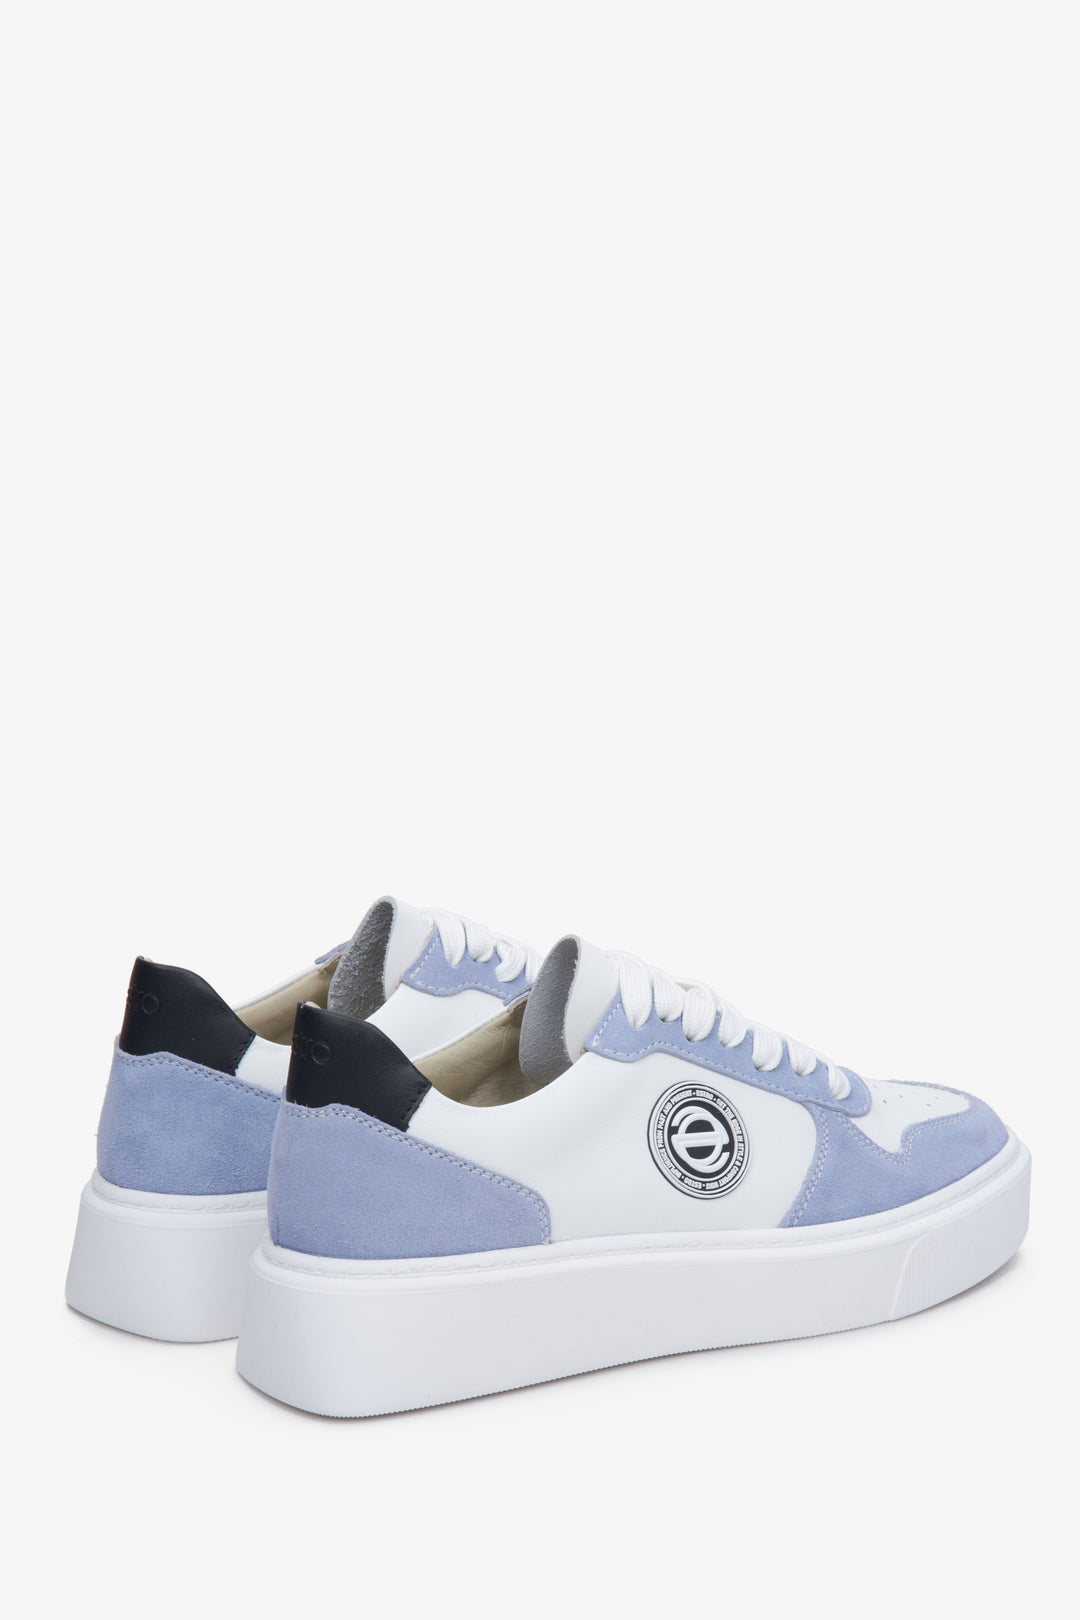 Blue and white sneakers, made from leather and natural velvet for women - presentation of the back part of the footwear. 